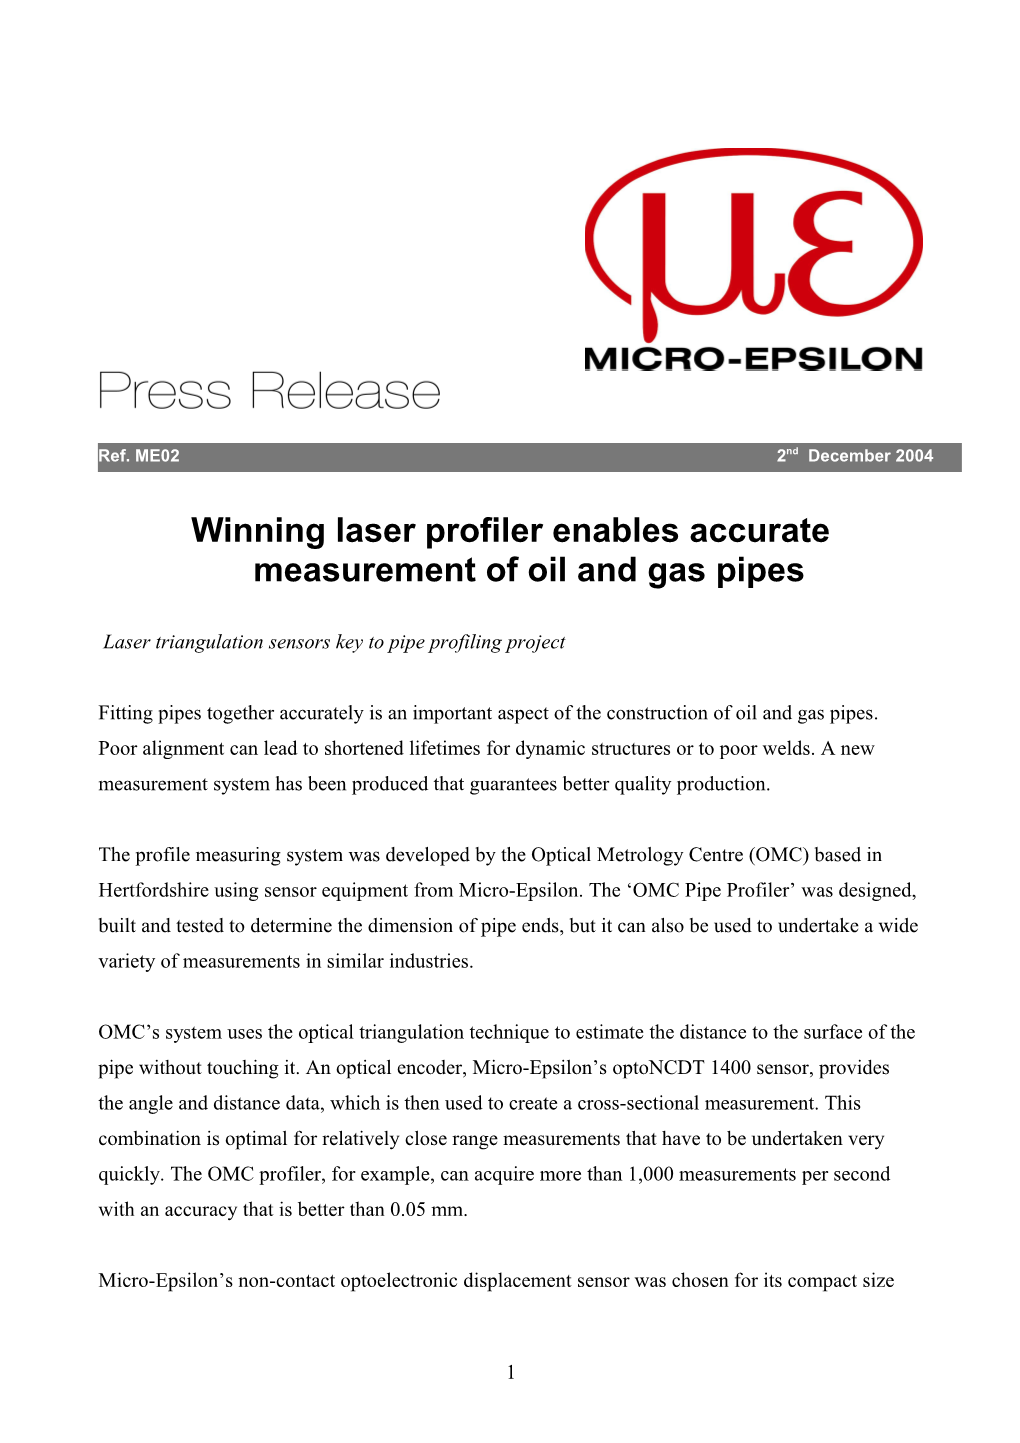 Winning Laser Profiler Enables Accurate Measurement of Oil and Gas Pipes